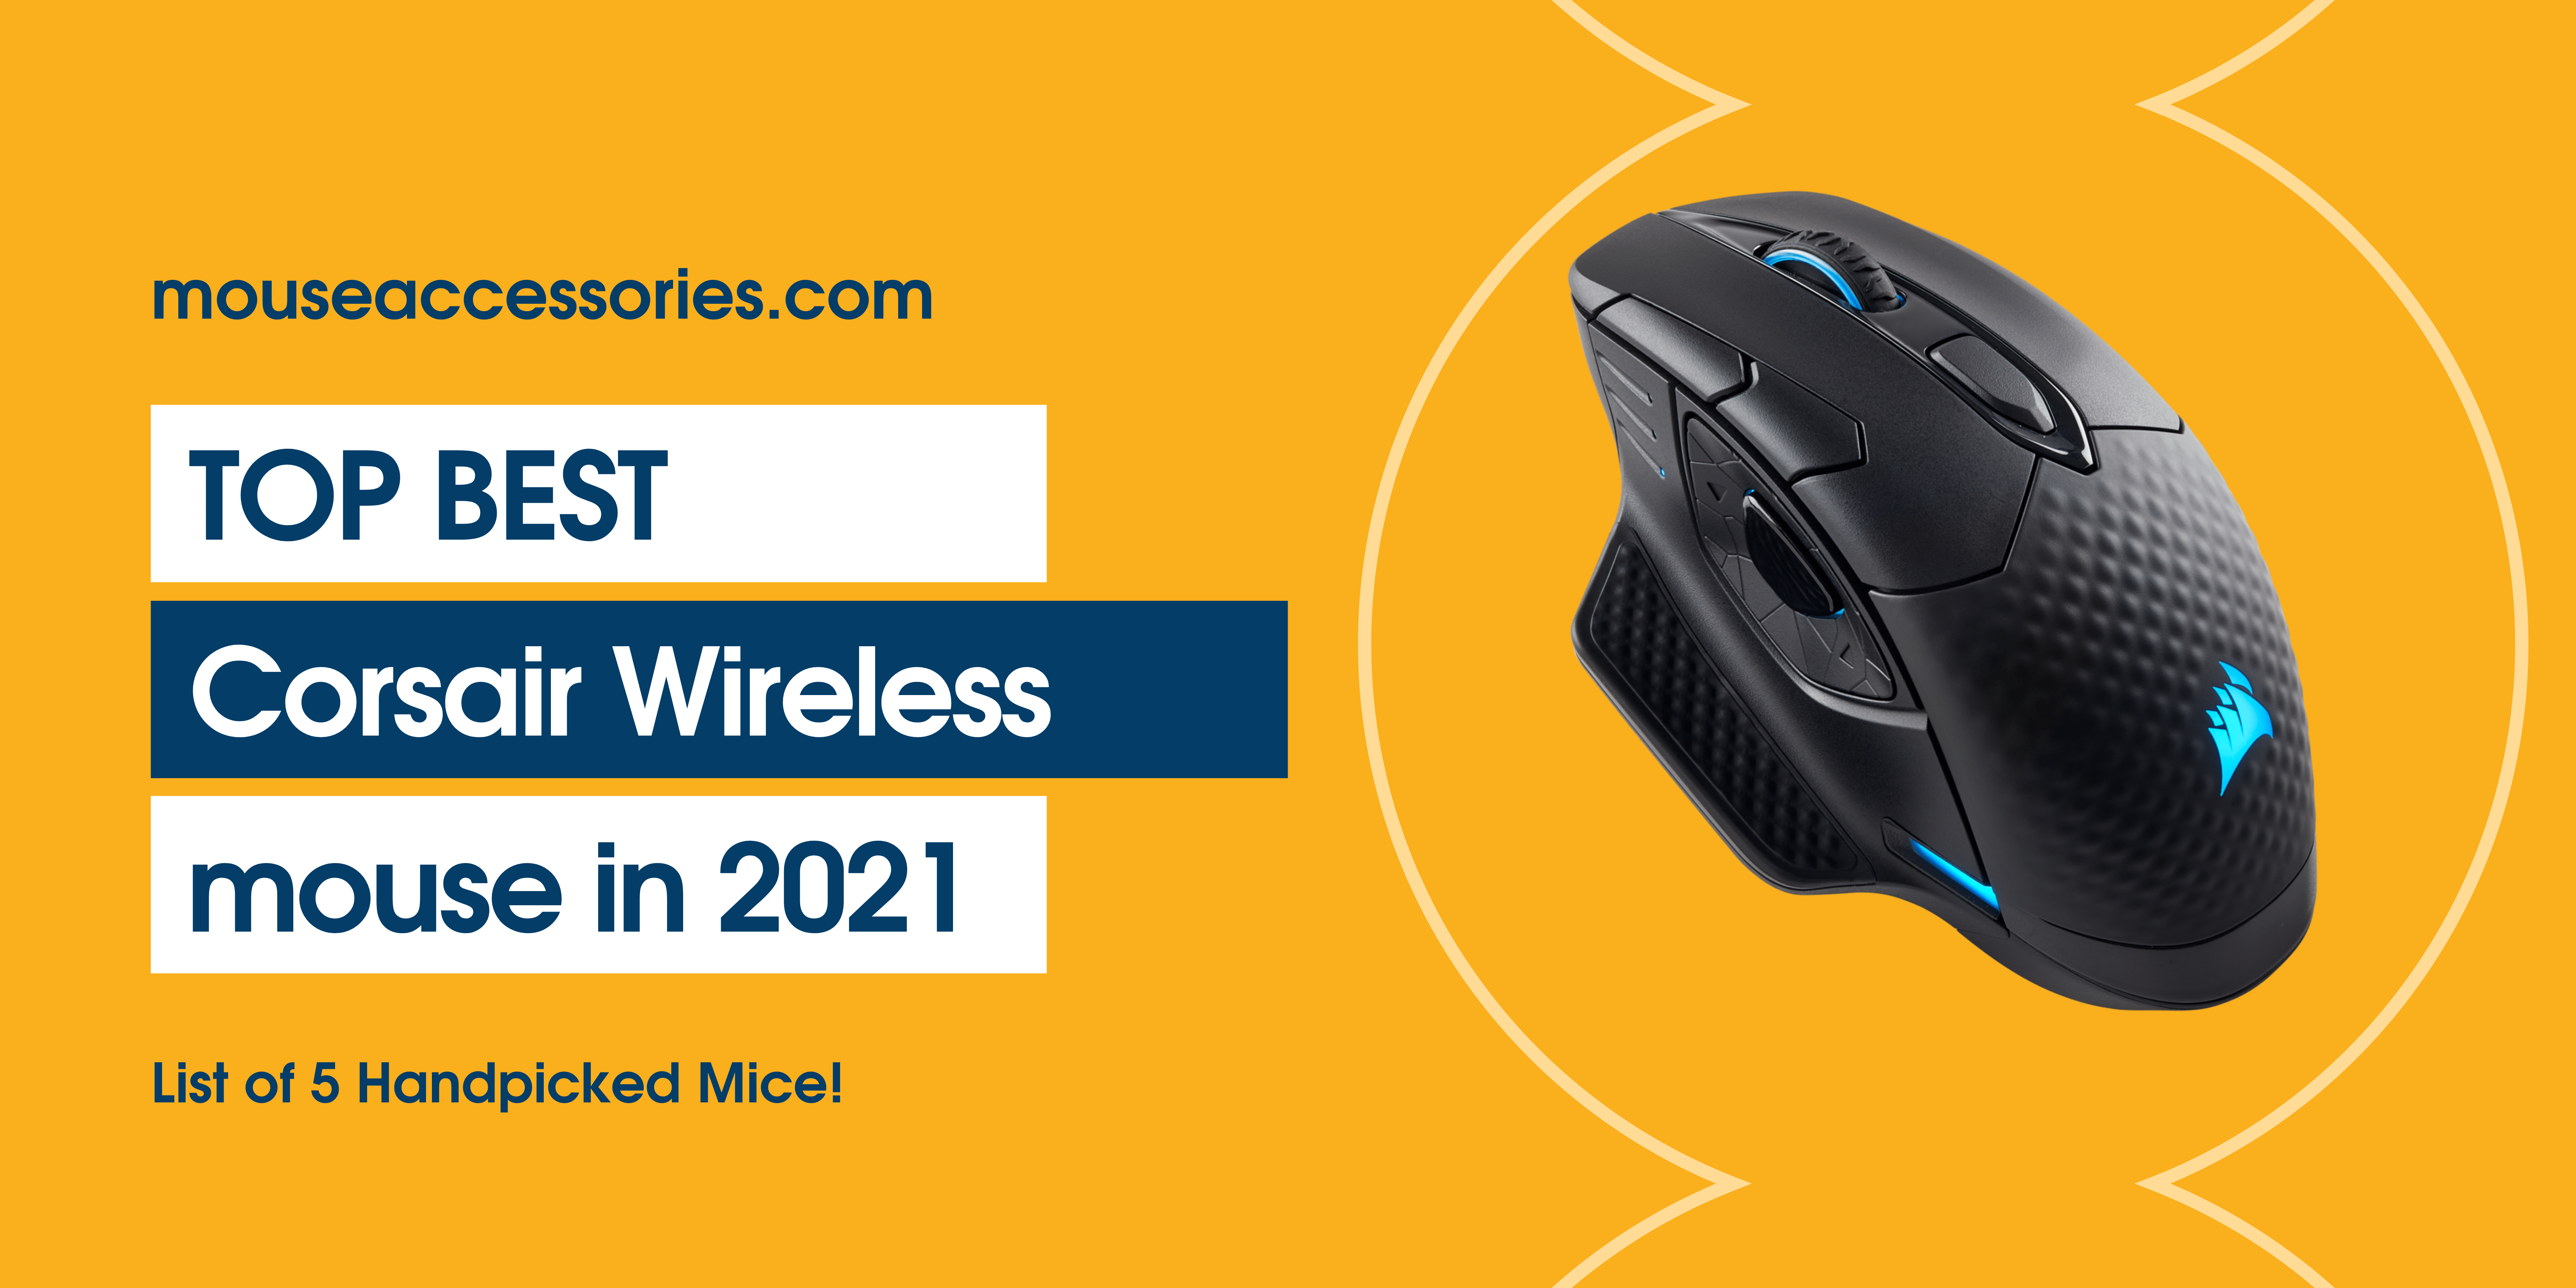 The Best Corsair Wireless Mouse for Ultimate Gaming in 2021